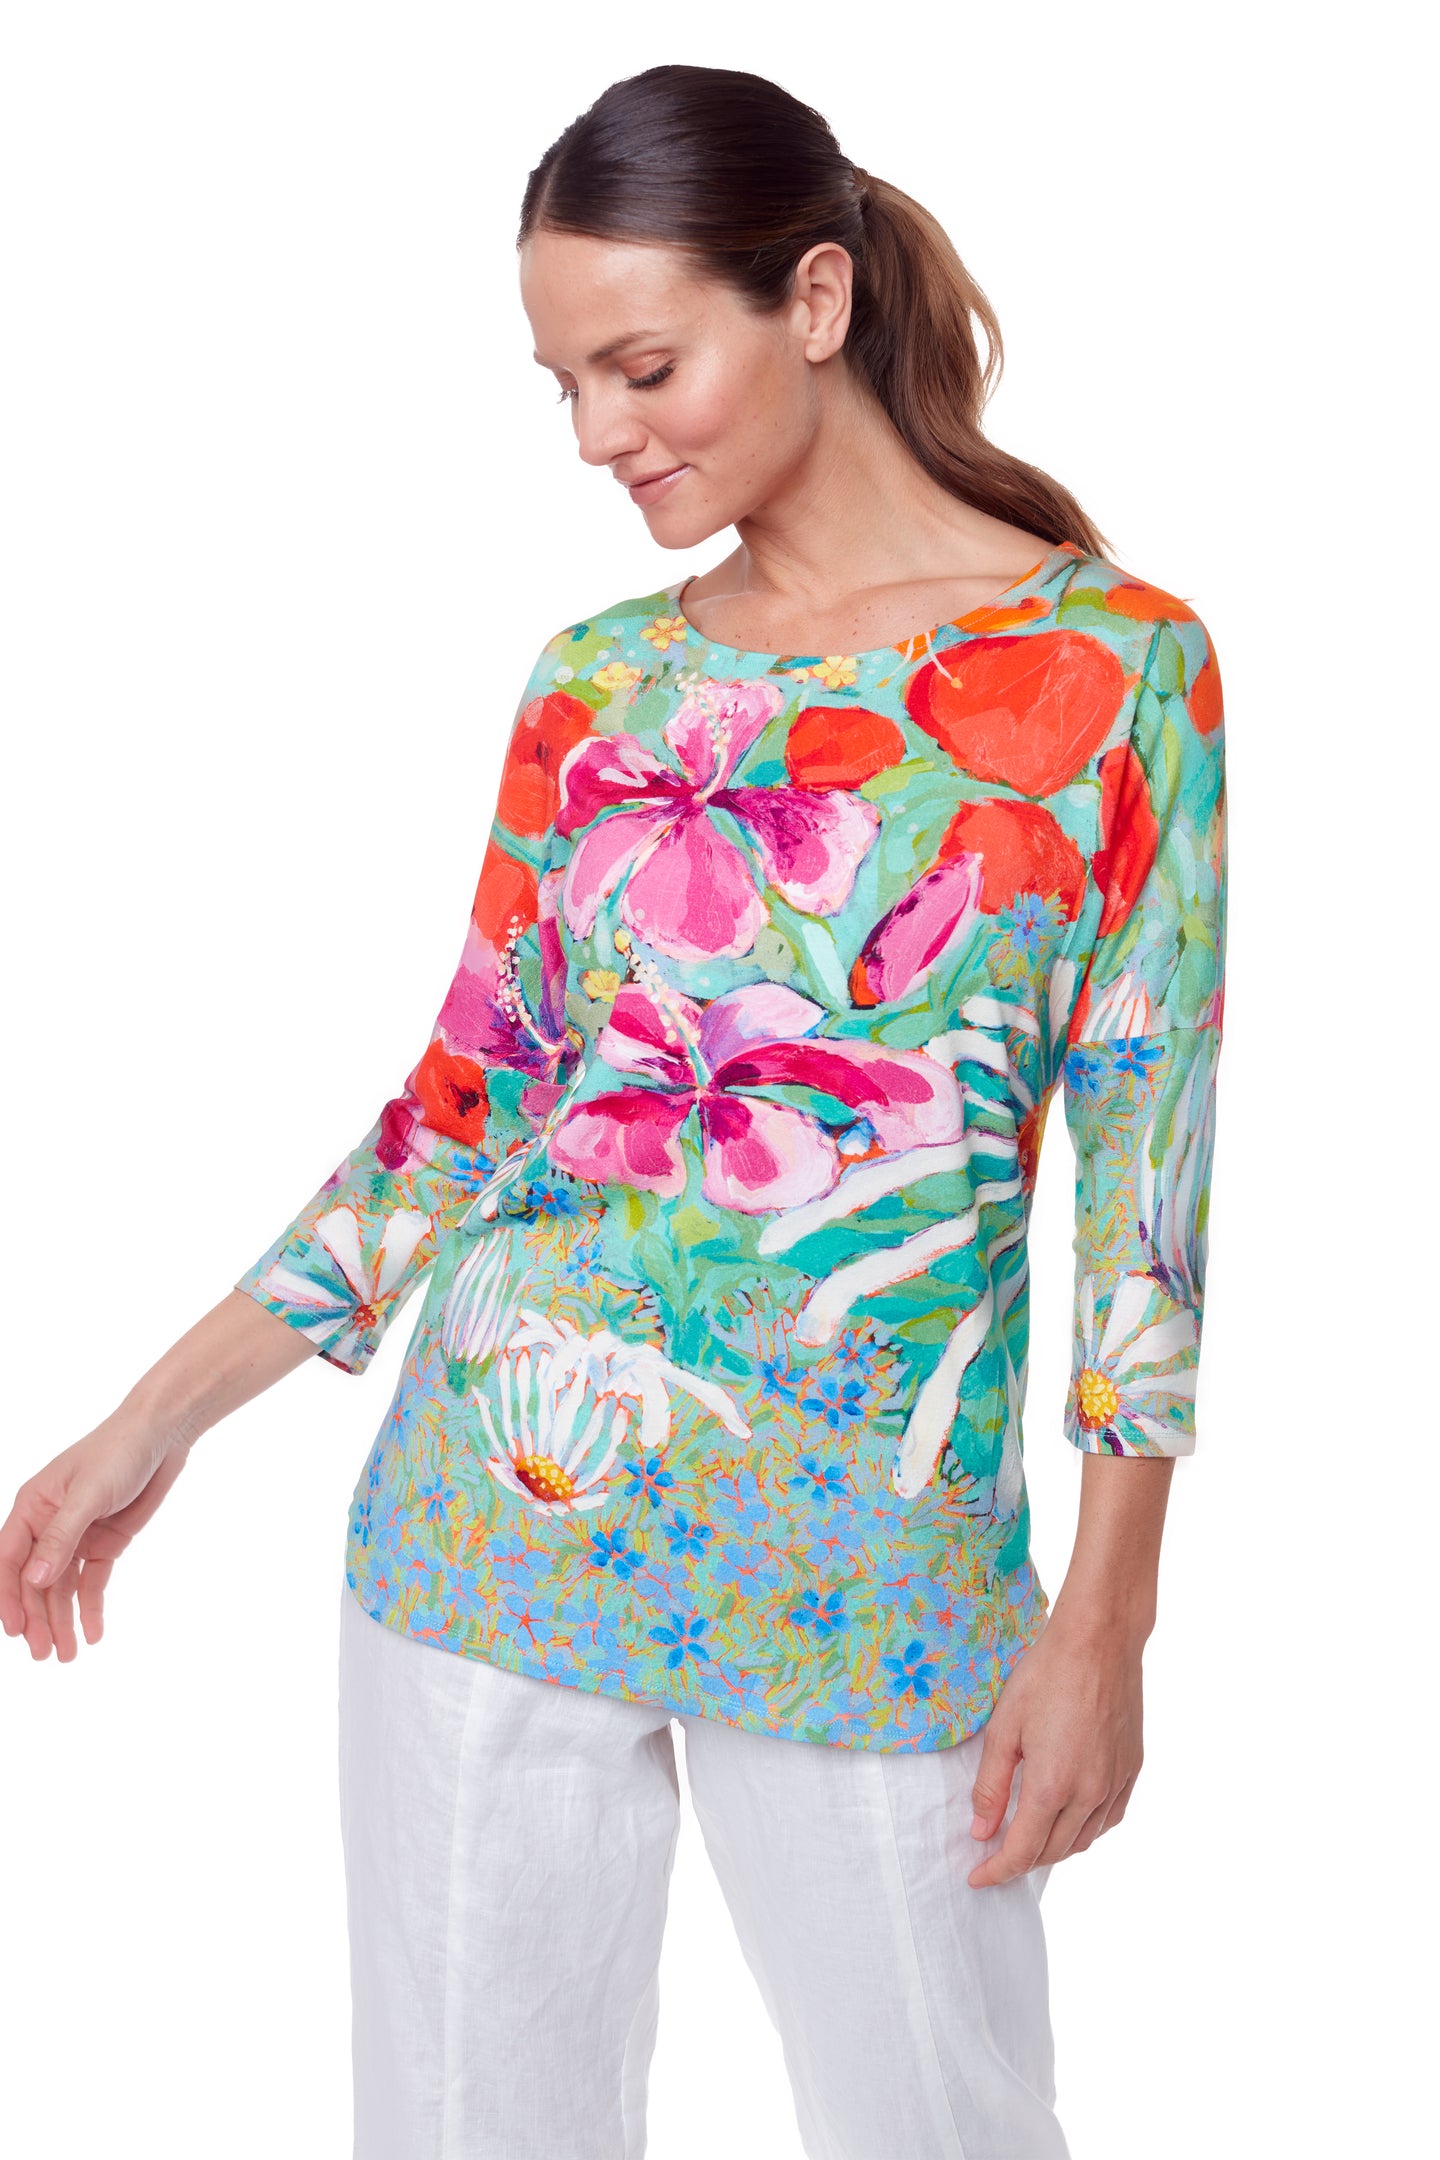 Where Butterflies and Bees Are 3/4-length dolman sleeve top